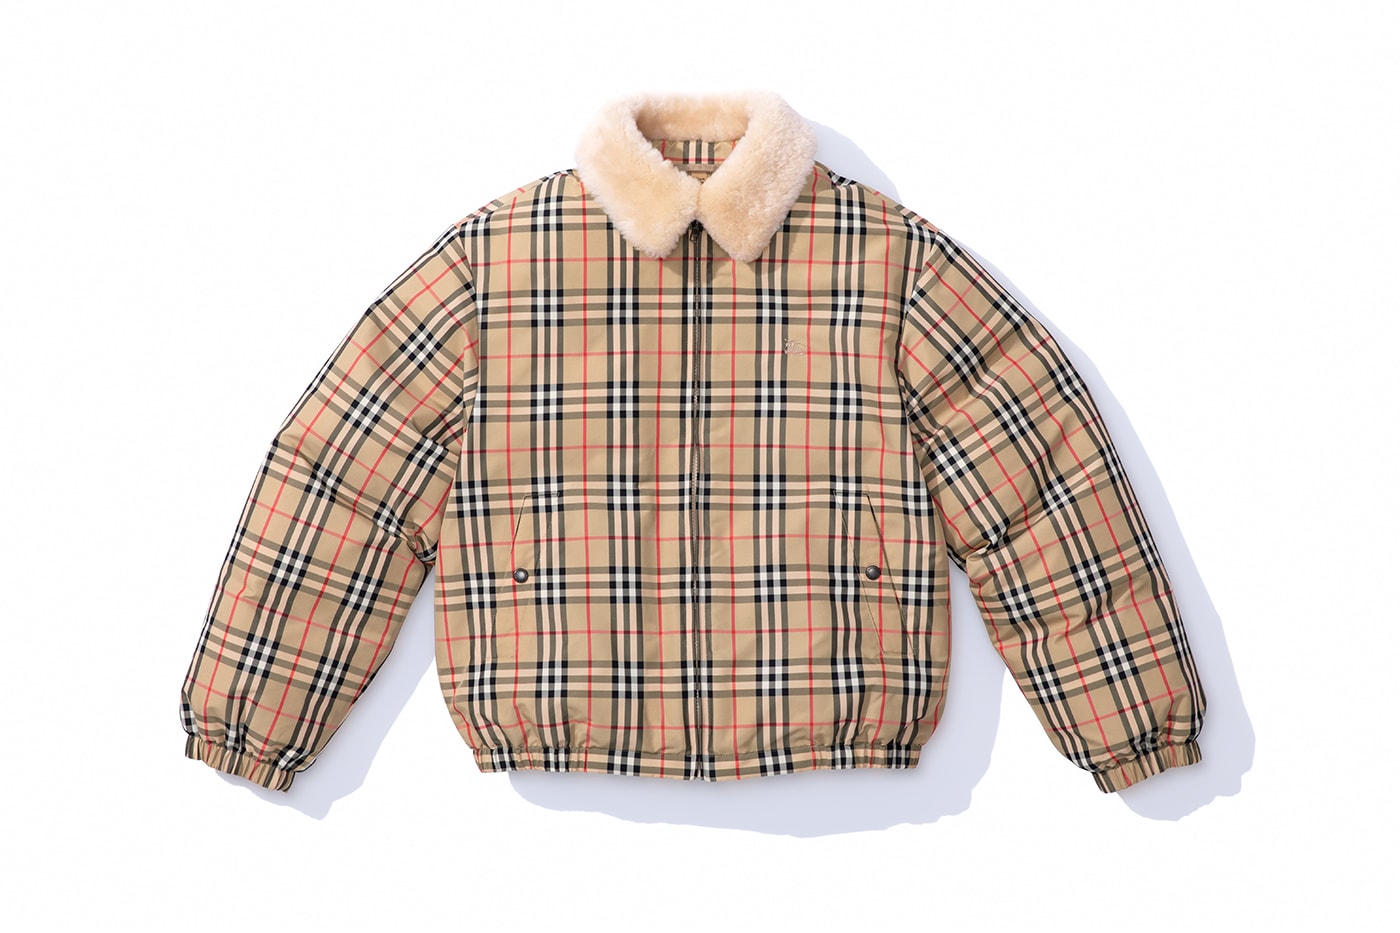 Supreme Burberry Spring Summer 2022 Collaboration Release Info Date Buy Price 